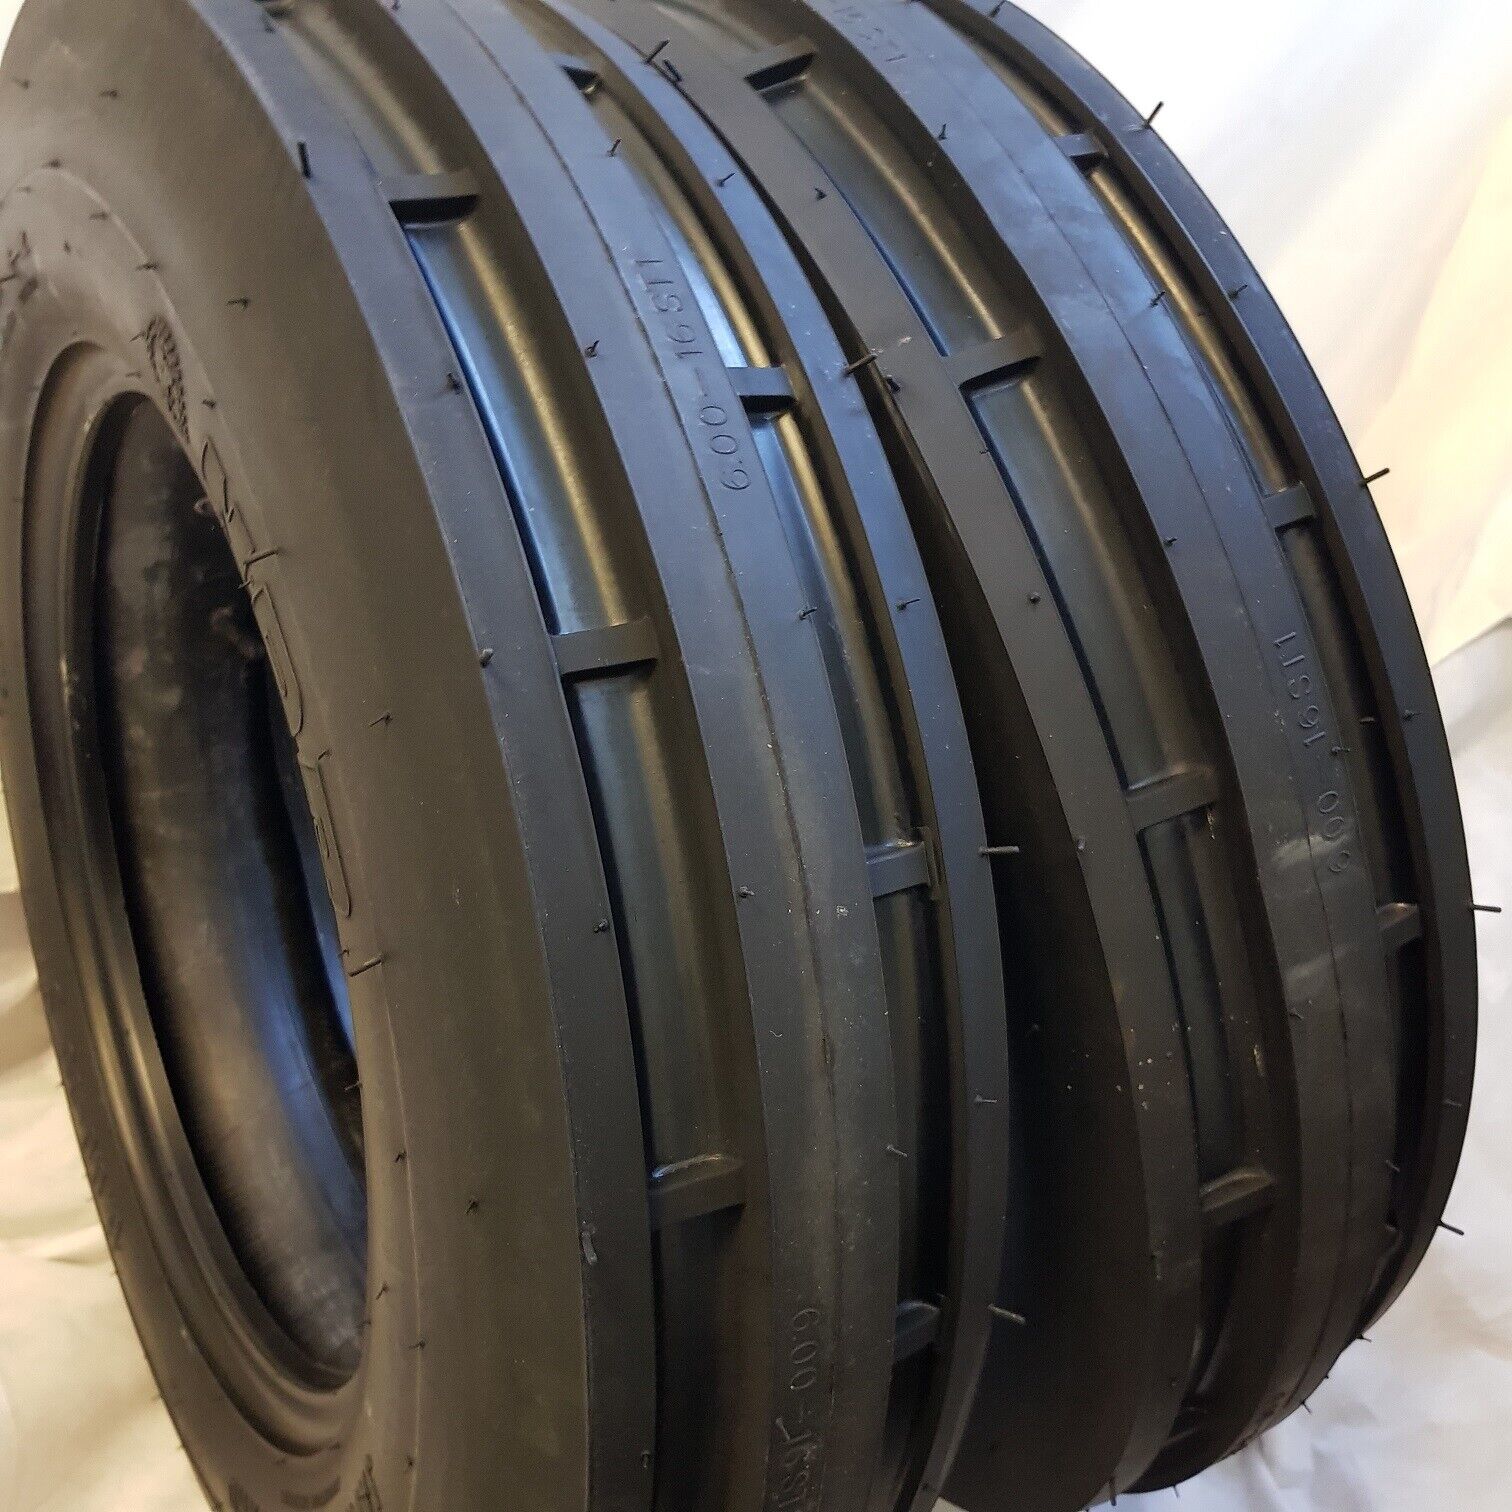 (2 -Tires w/Tubes)  RC 5.50-16, 5.50X16 ST1  6 Ply 3 Rib Tractor Tires 5.50-16 ROAD CREW 6 Ply 3